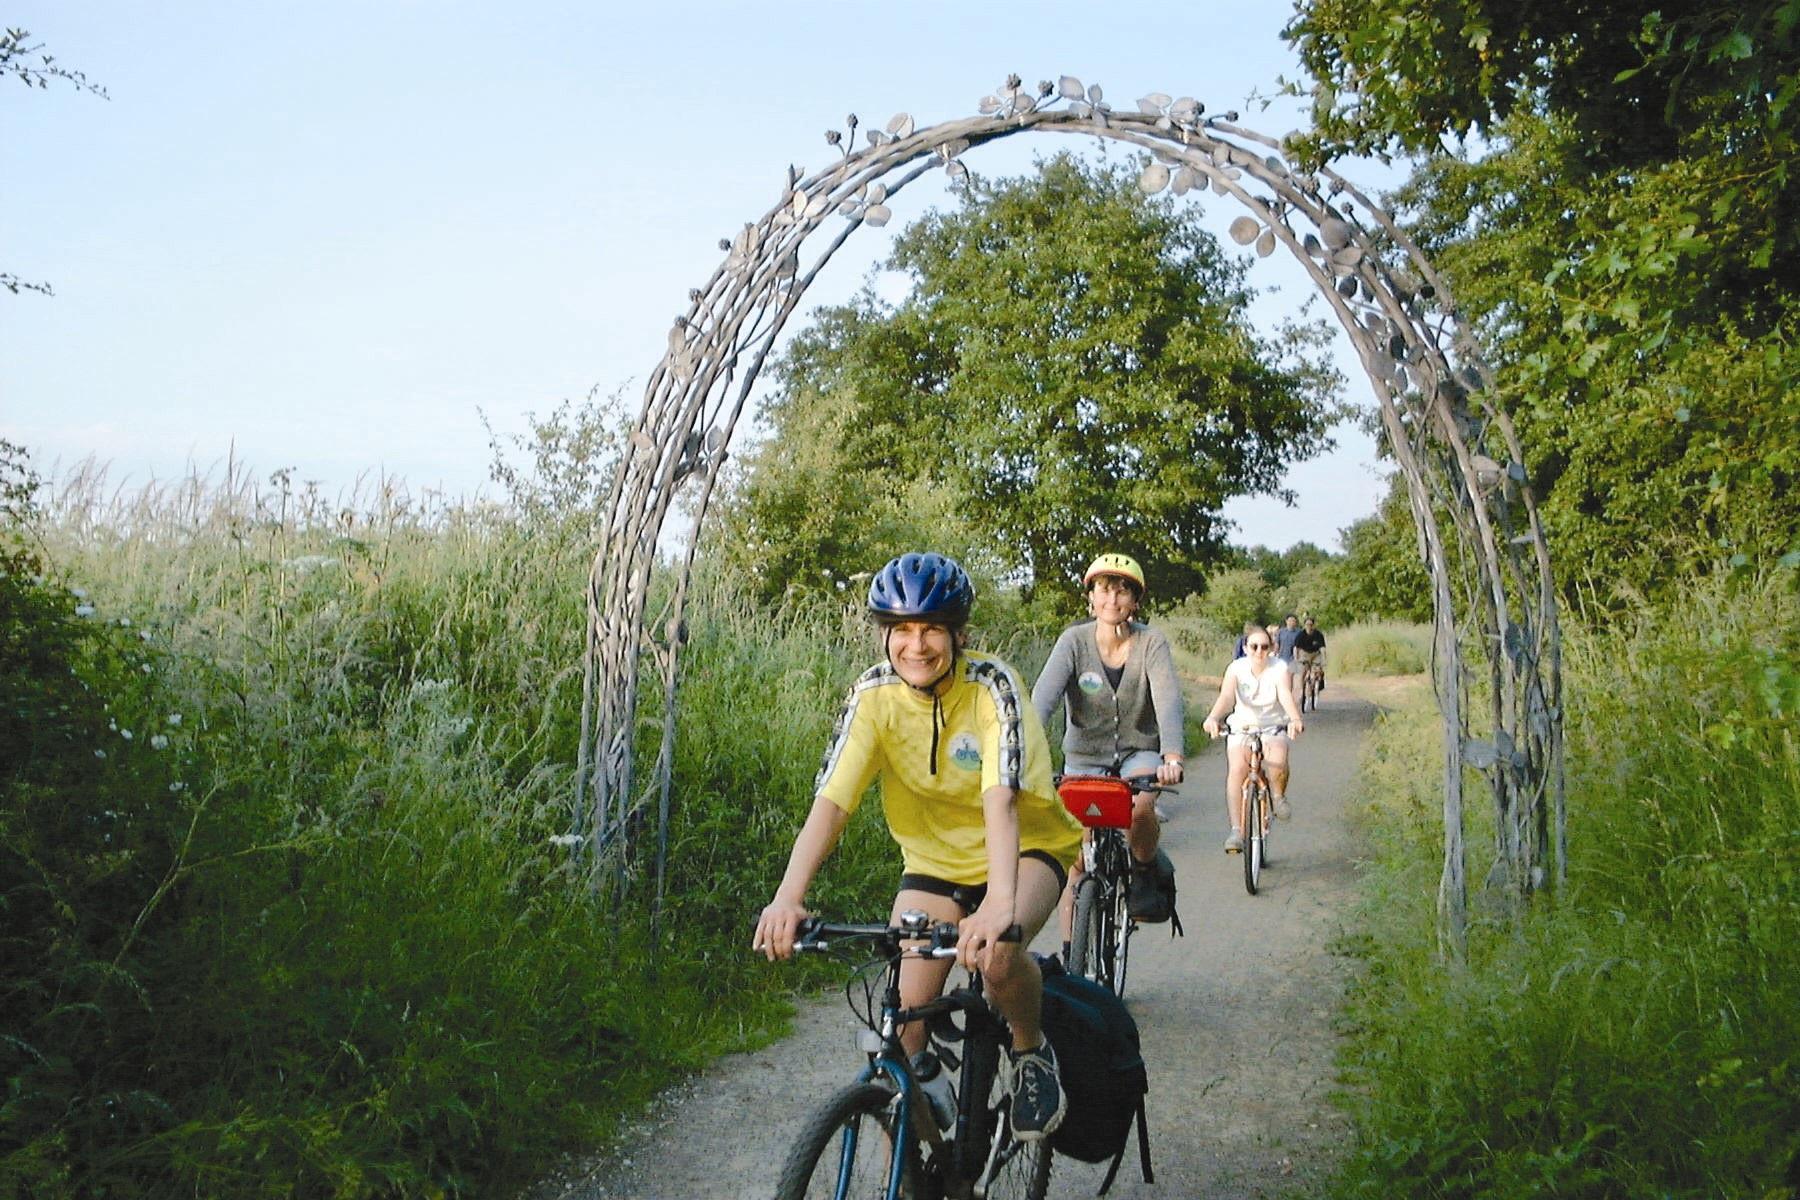 people on bikes in a country lane